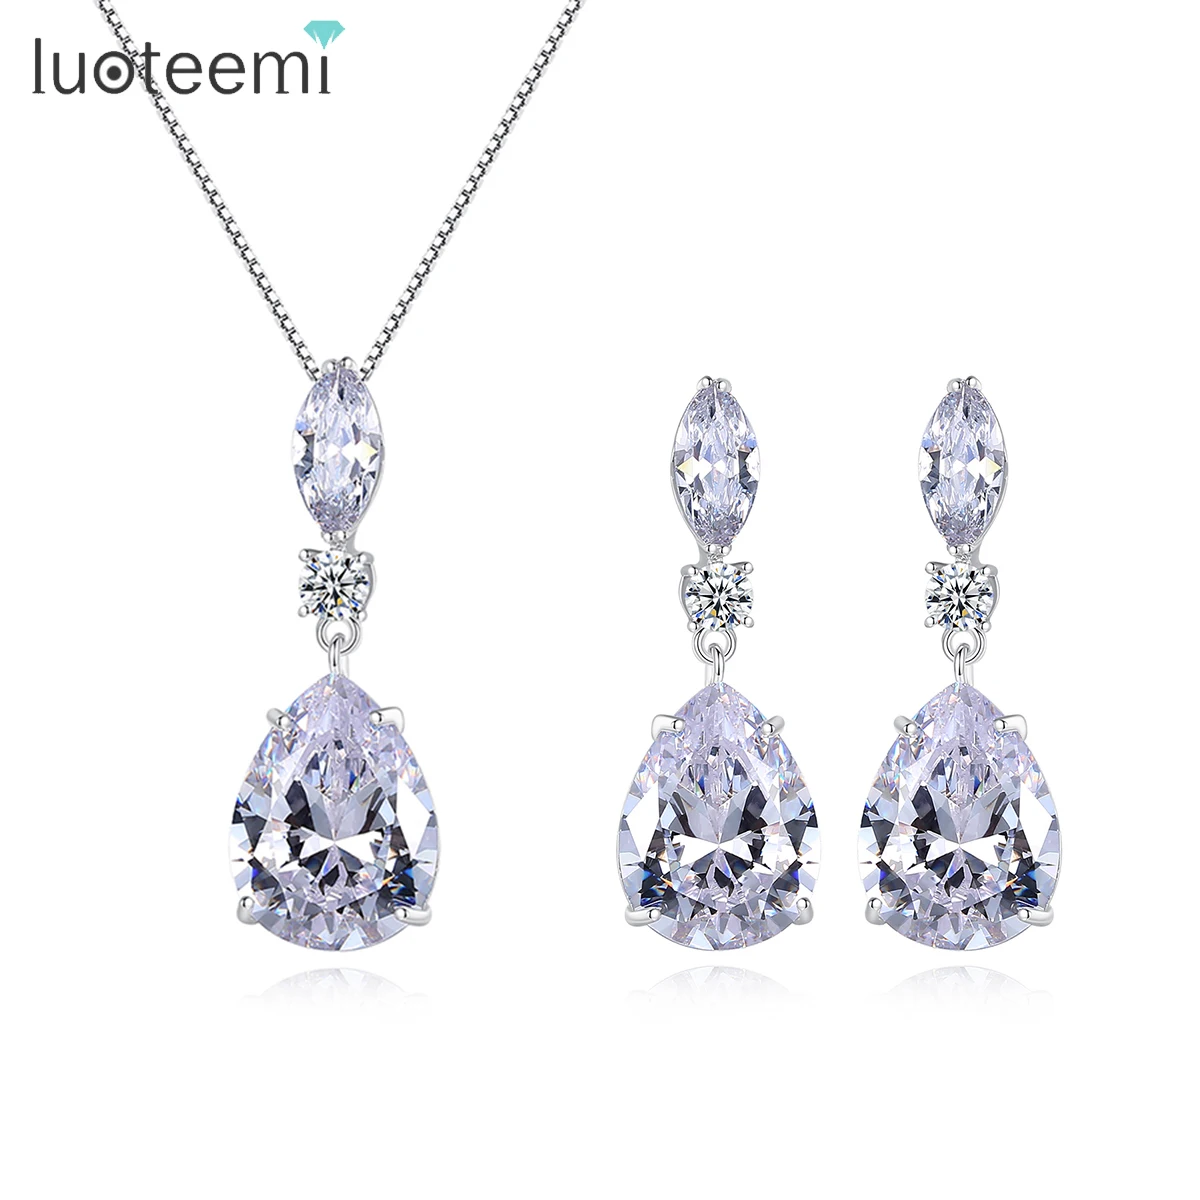 Silver Teardrop Clear Cubic Zirconia Crystal Rhinestone Drop Earrings and Necklace Bridal Jewelry Sets Best Gift for Bridesmaids AMYJANE Elegant Jewelry Set for Women